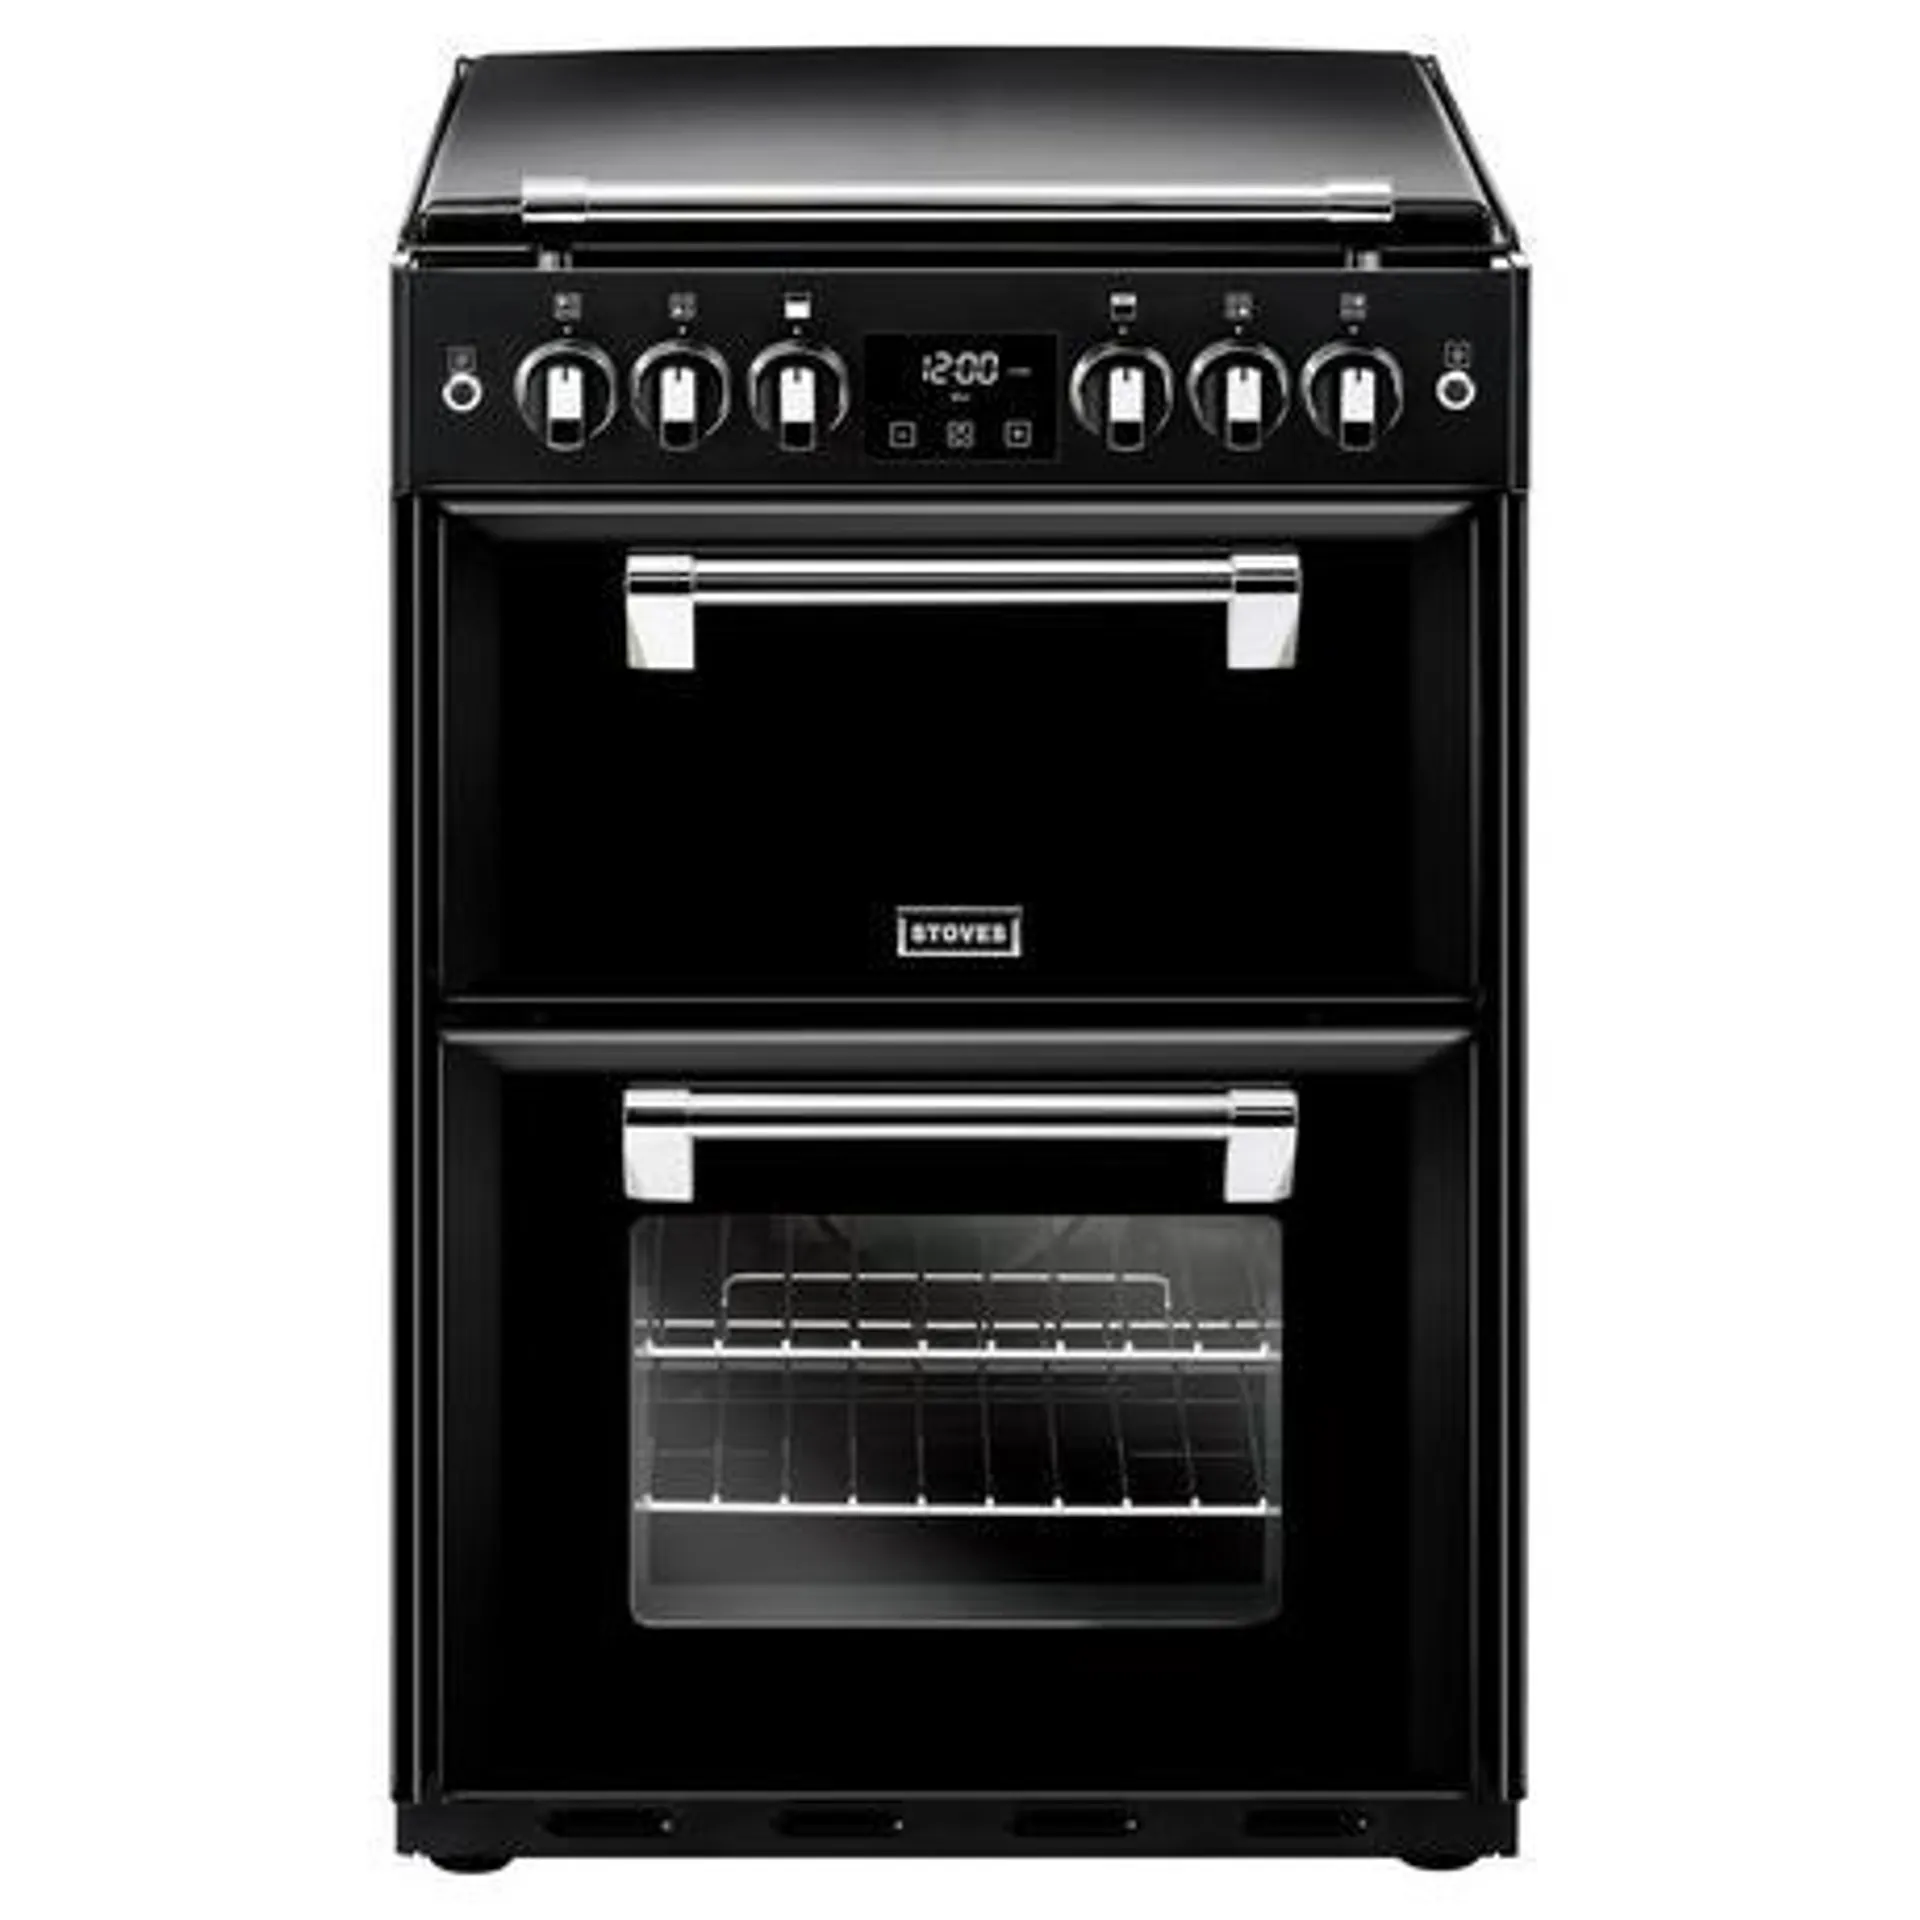 Stoves 444444726 Richmond 600G Gas Double Oven Cooker